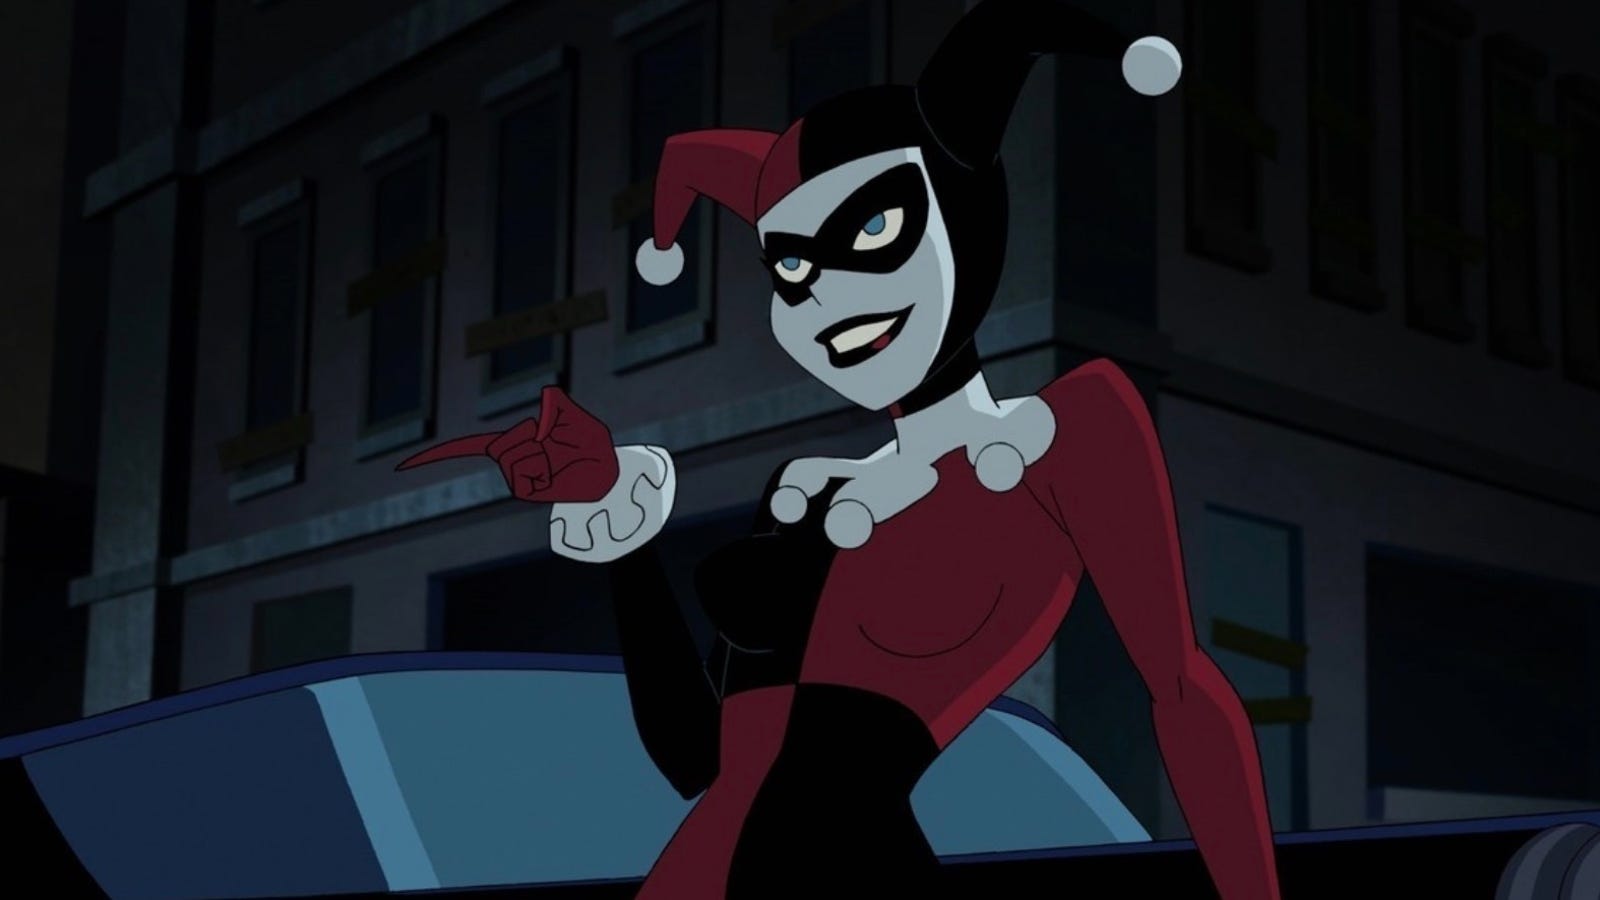 A New Harley Quinn Animated Series Is Coming to DC's Streaming Service